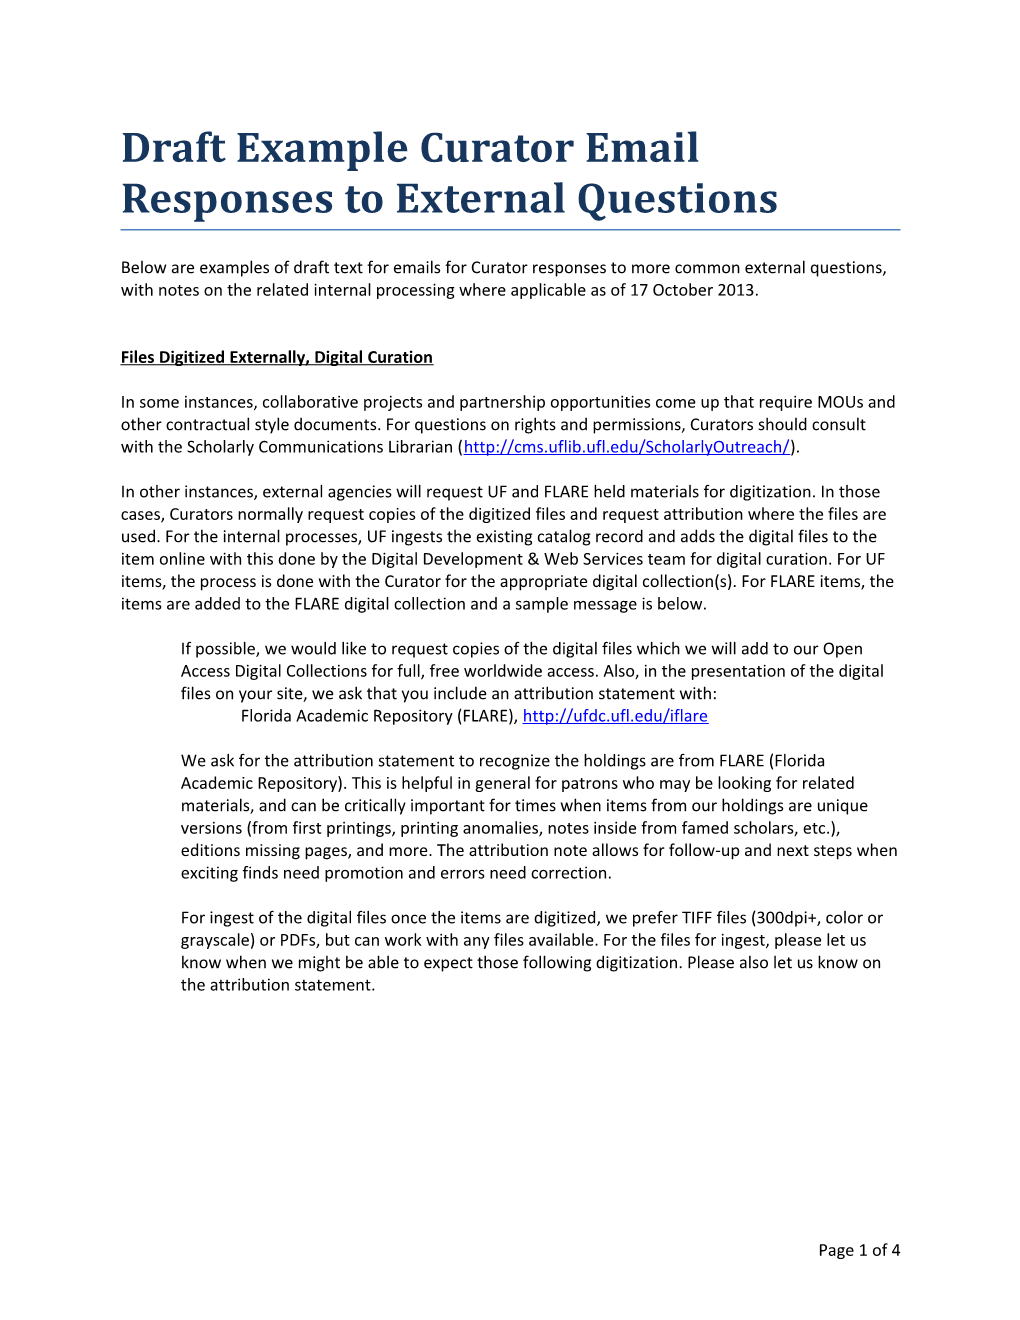 Draft Example Curator Email Responses to External Questions